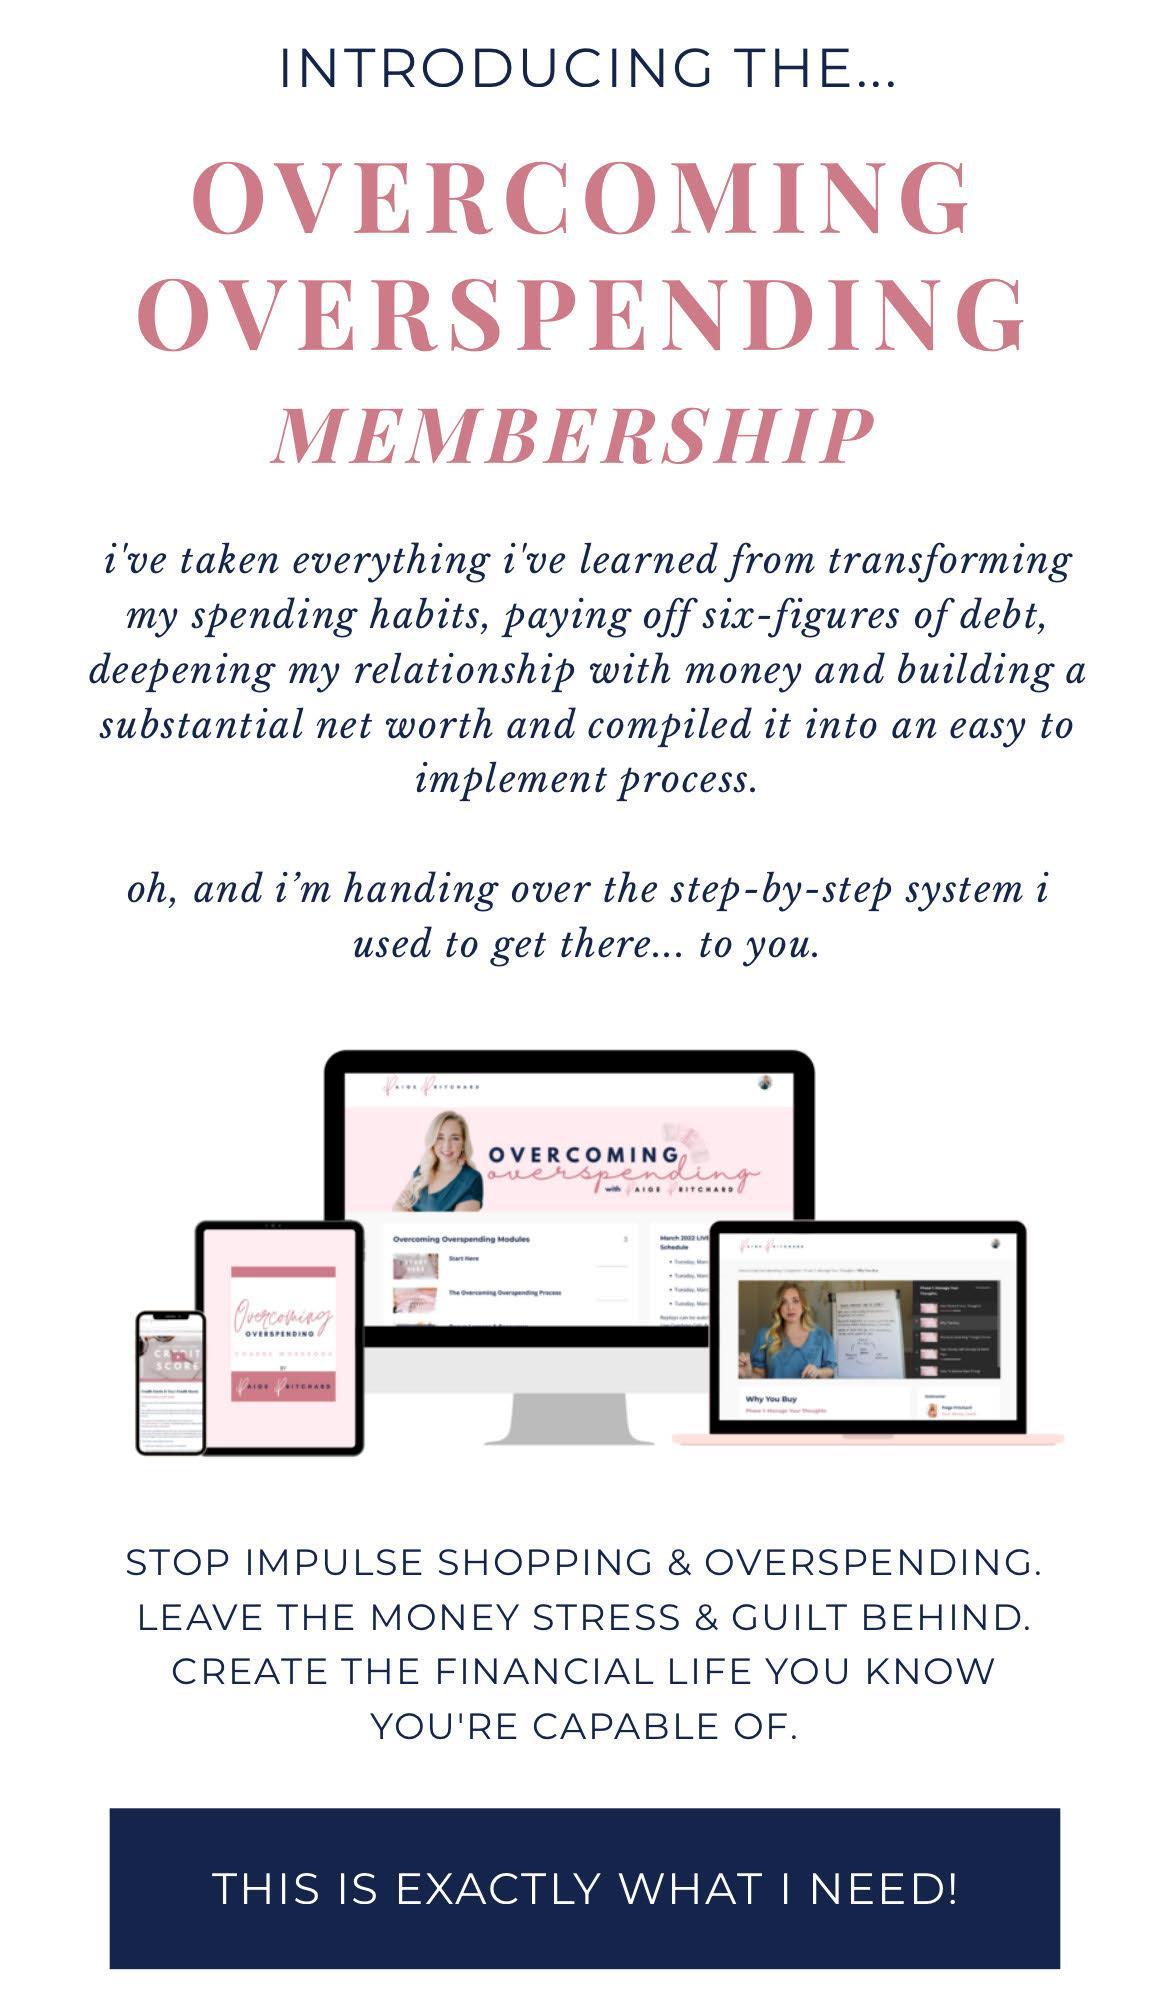 Introducing the overcoming overspending membership with persuasive call to action